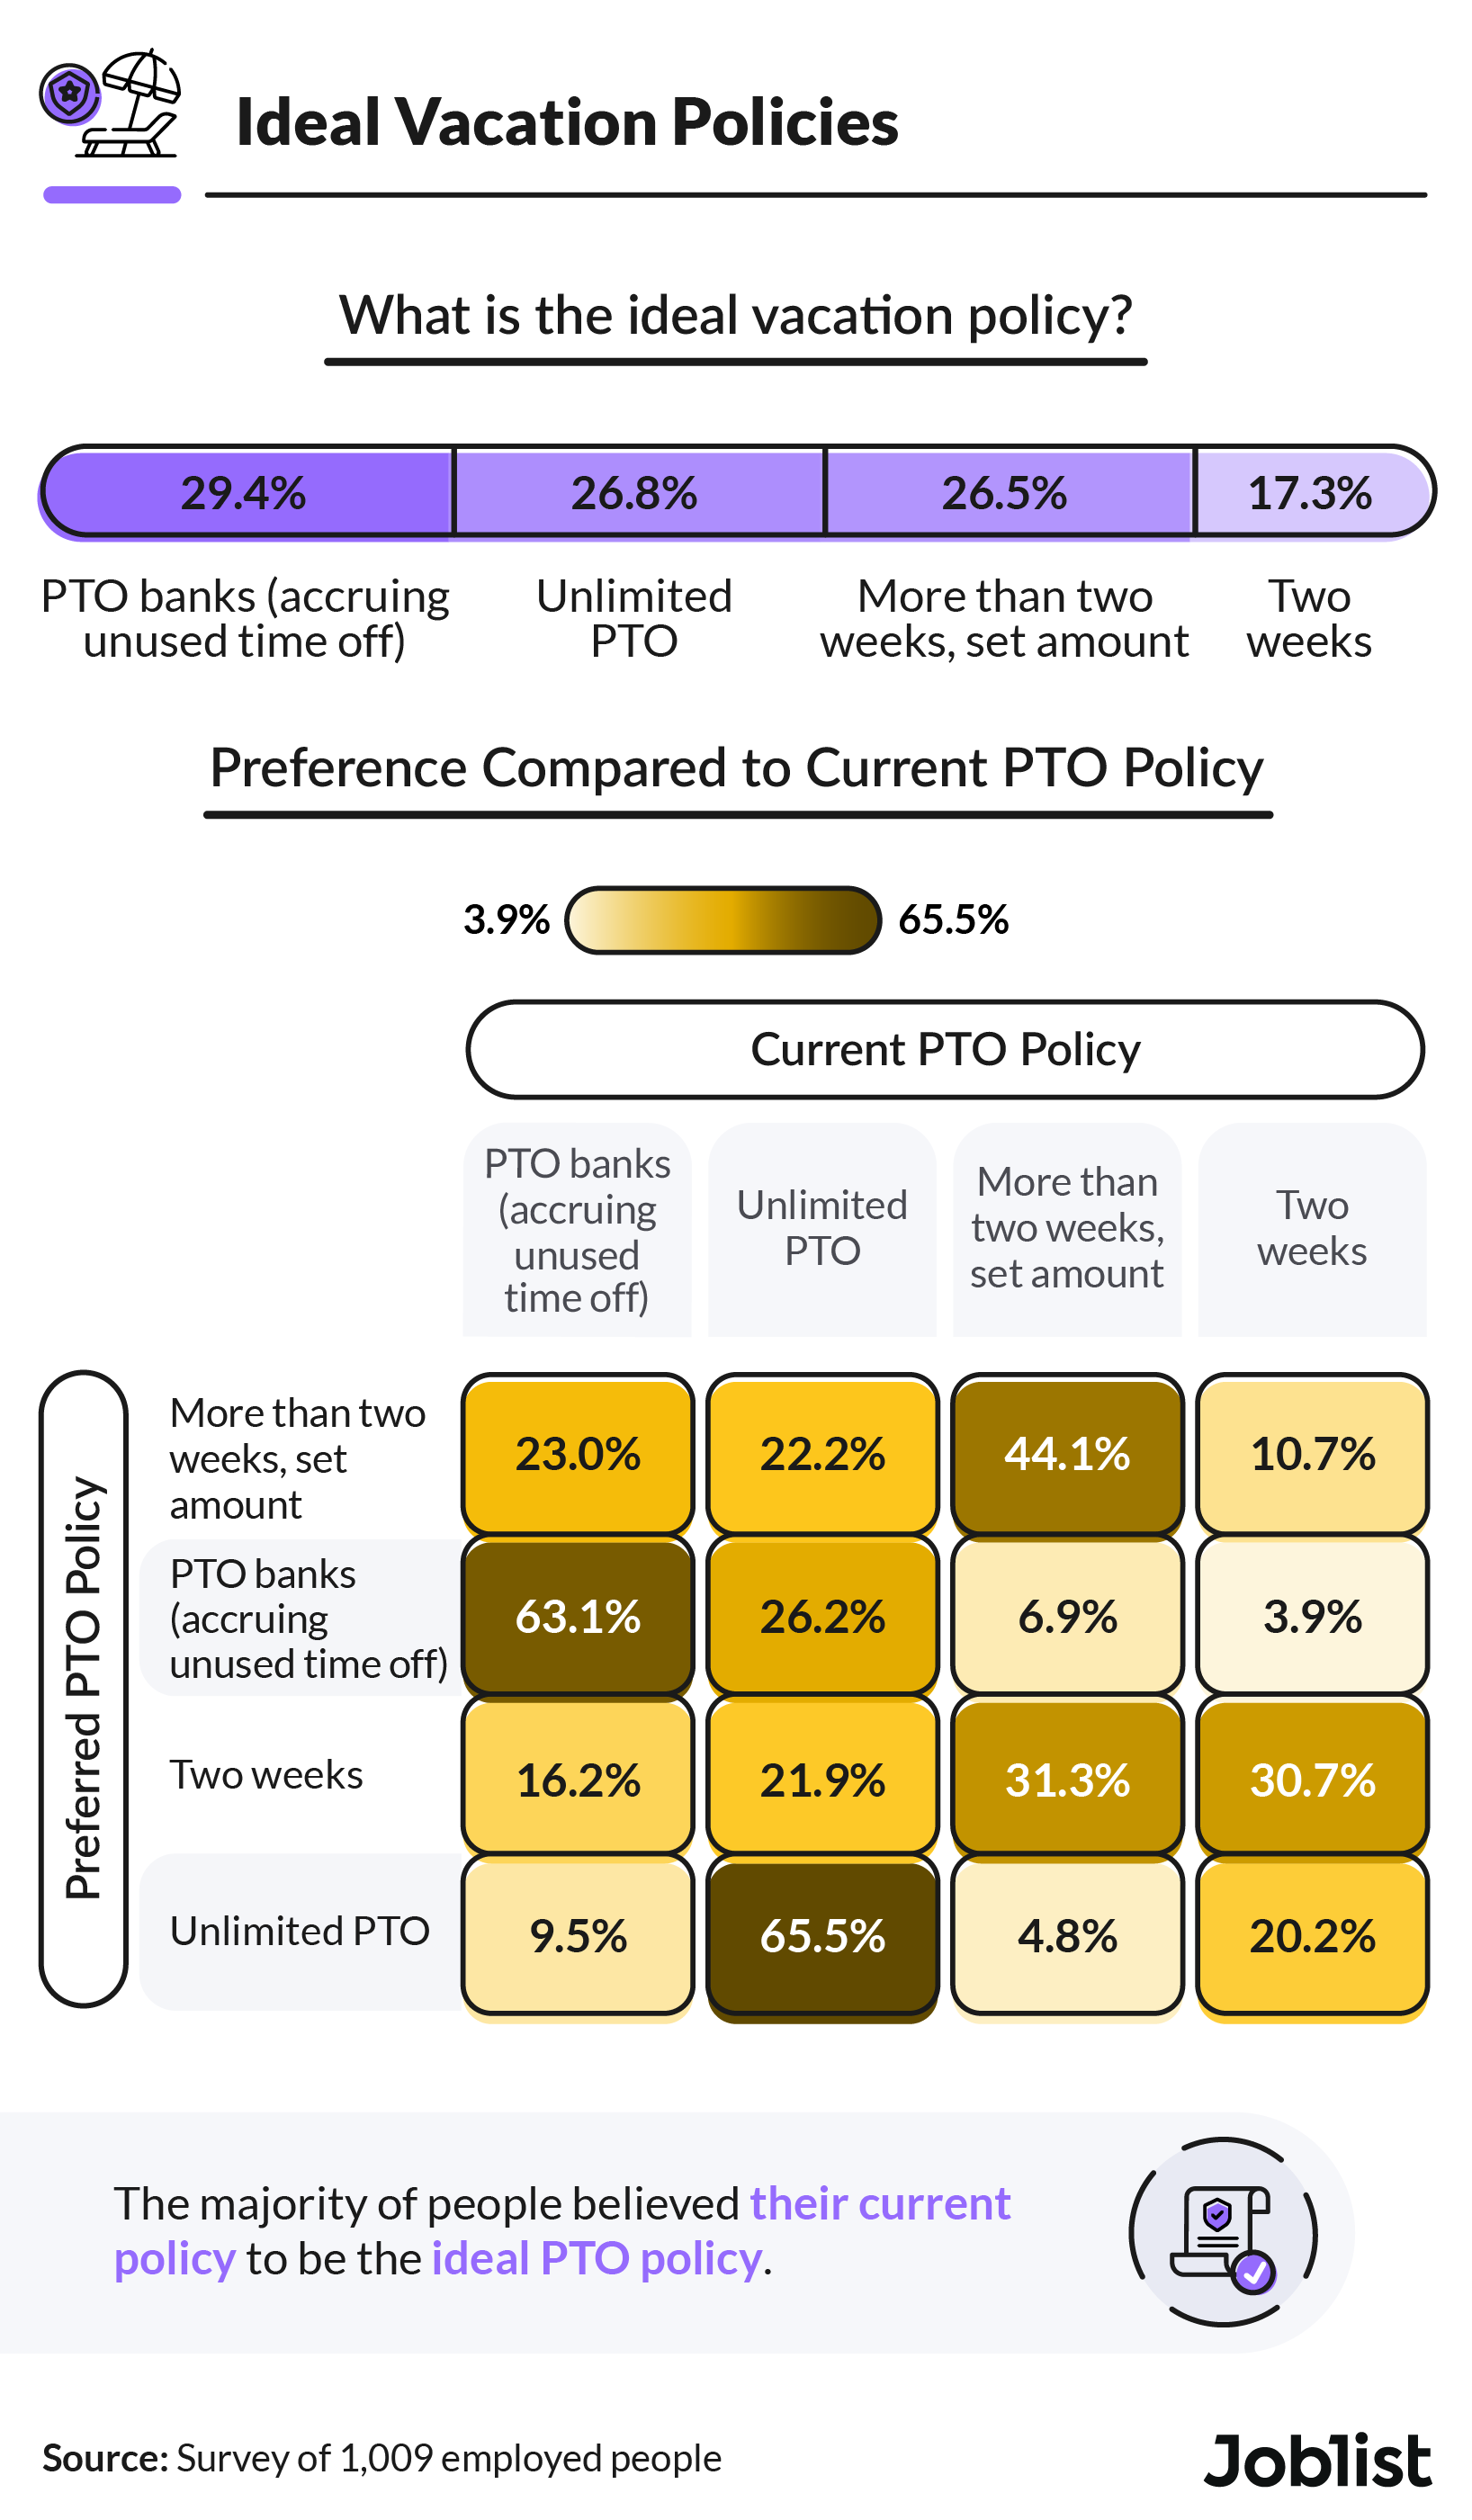 Employee preferences for ideal vacation policy compared to current policy